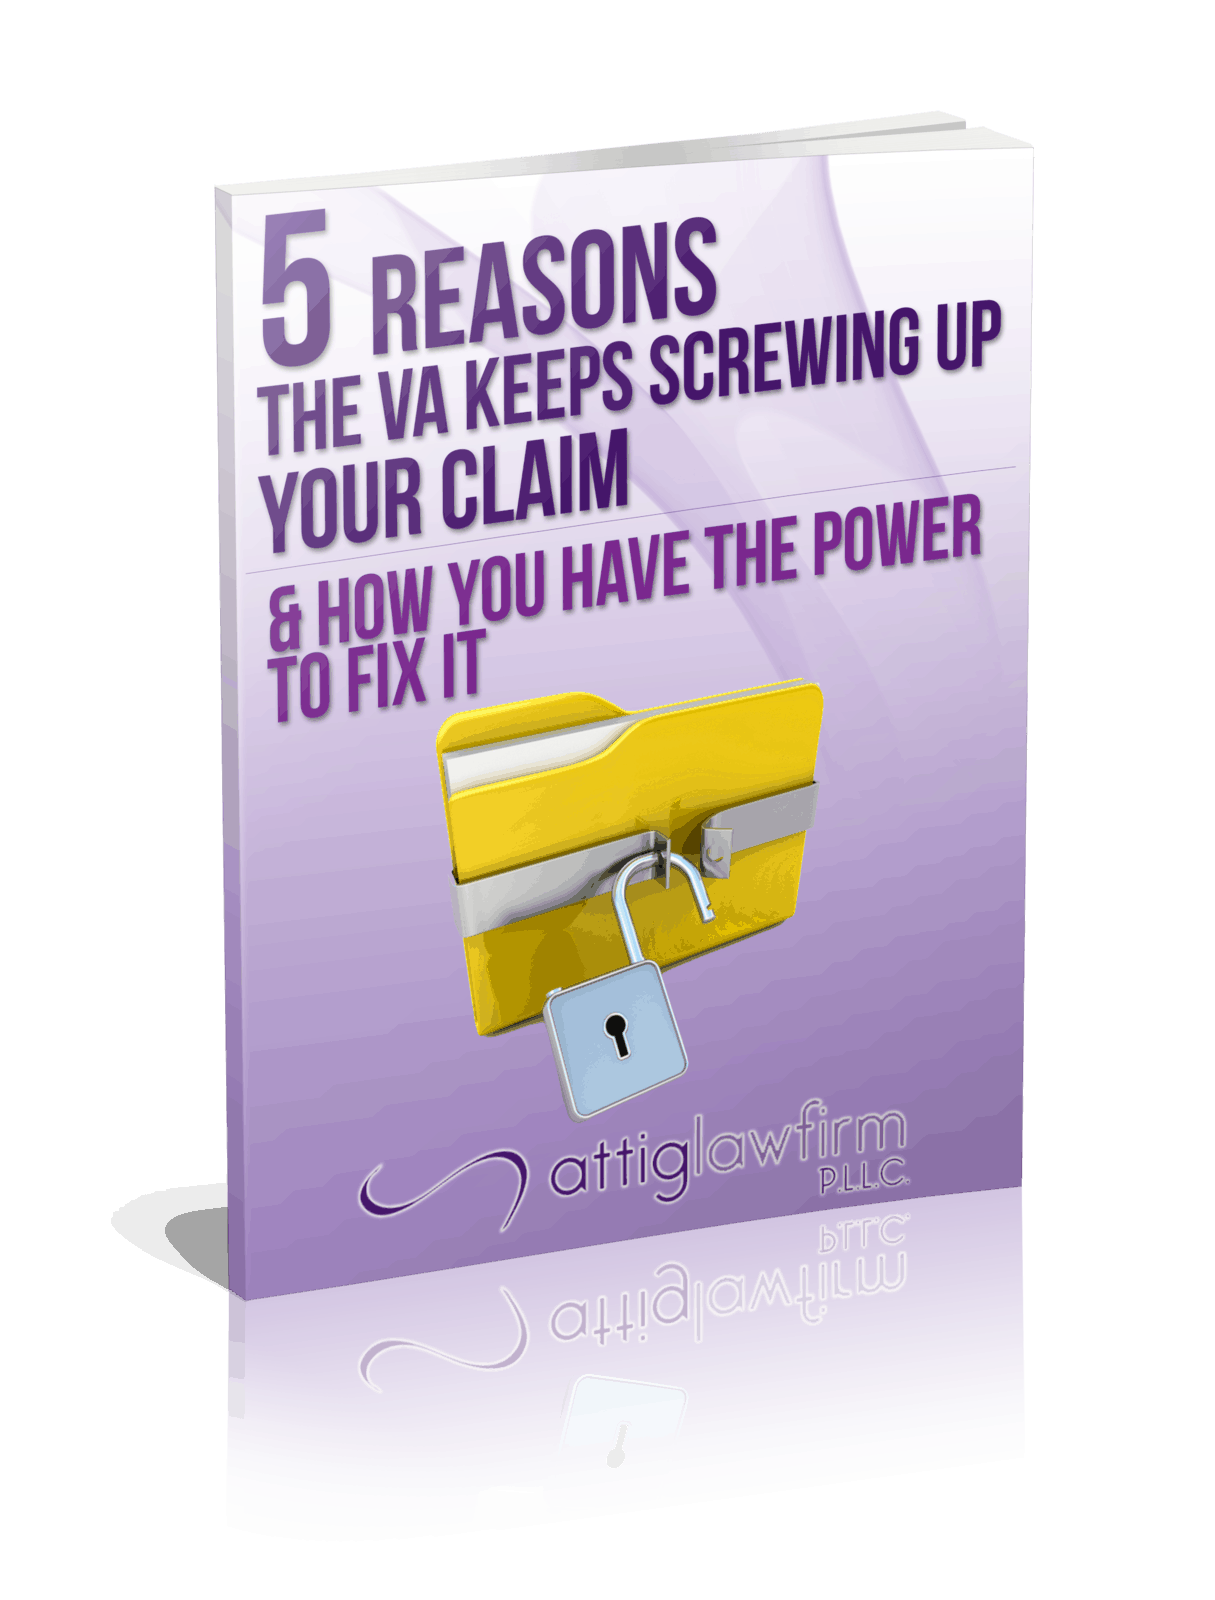 5 Reasons the VA Keeps Screwing Up VA Claims & How YOU Have the Power to Fix It!”